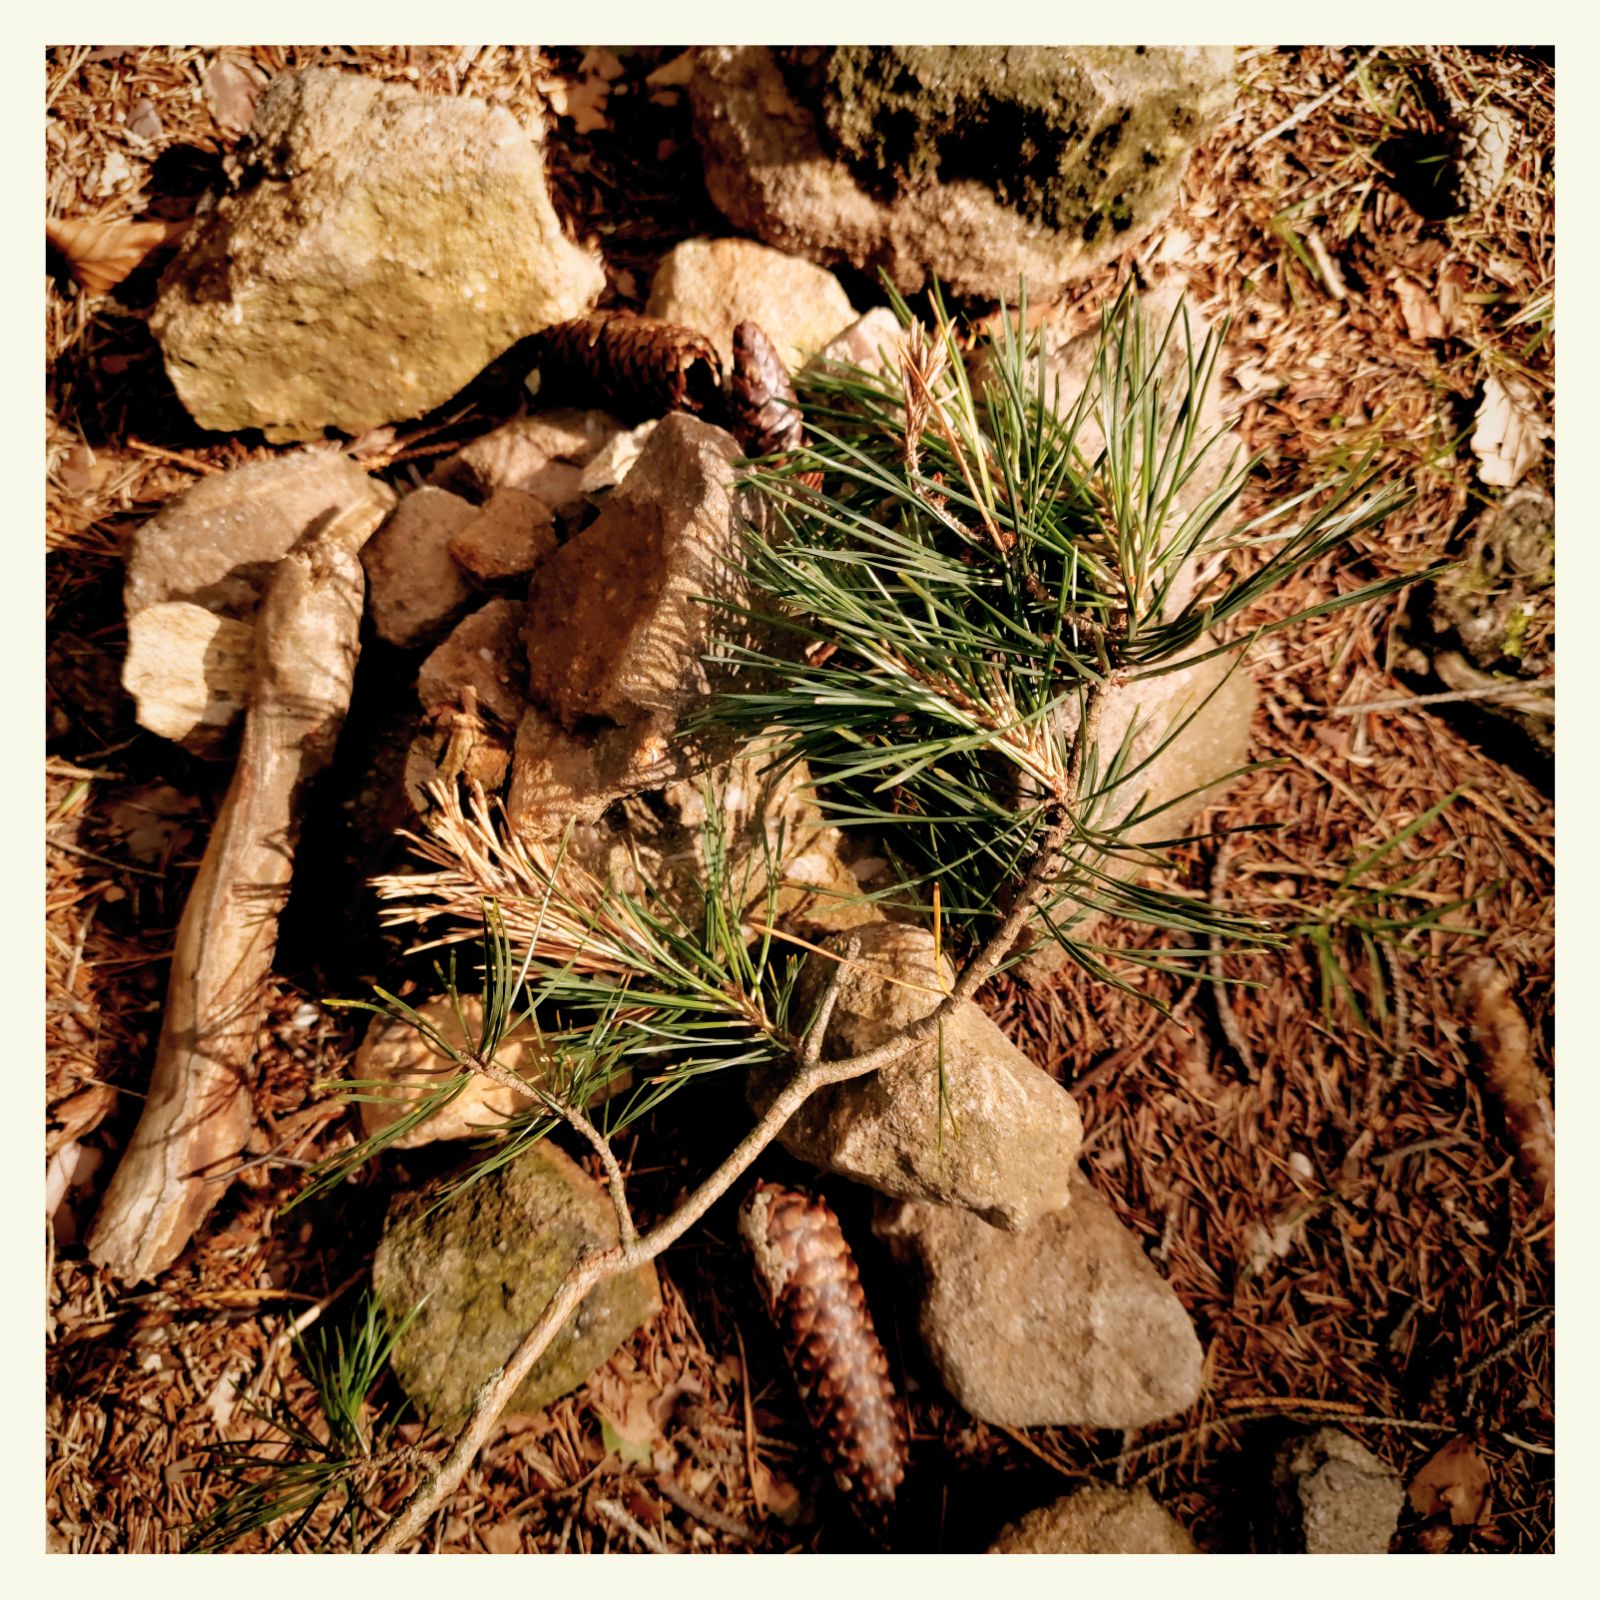 Collection: Seeds and needles of conifers, and forest stones.